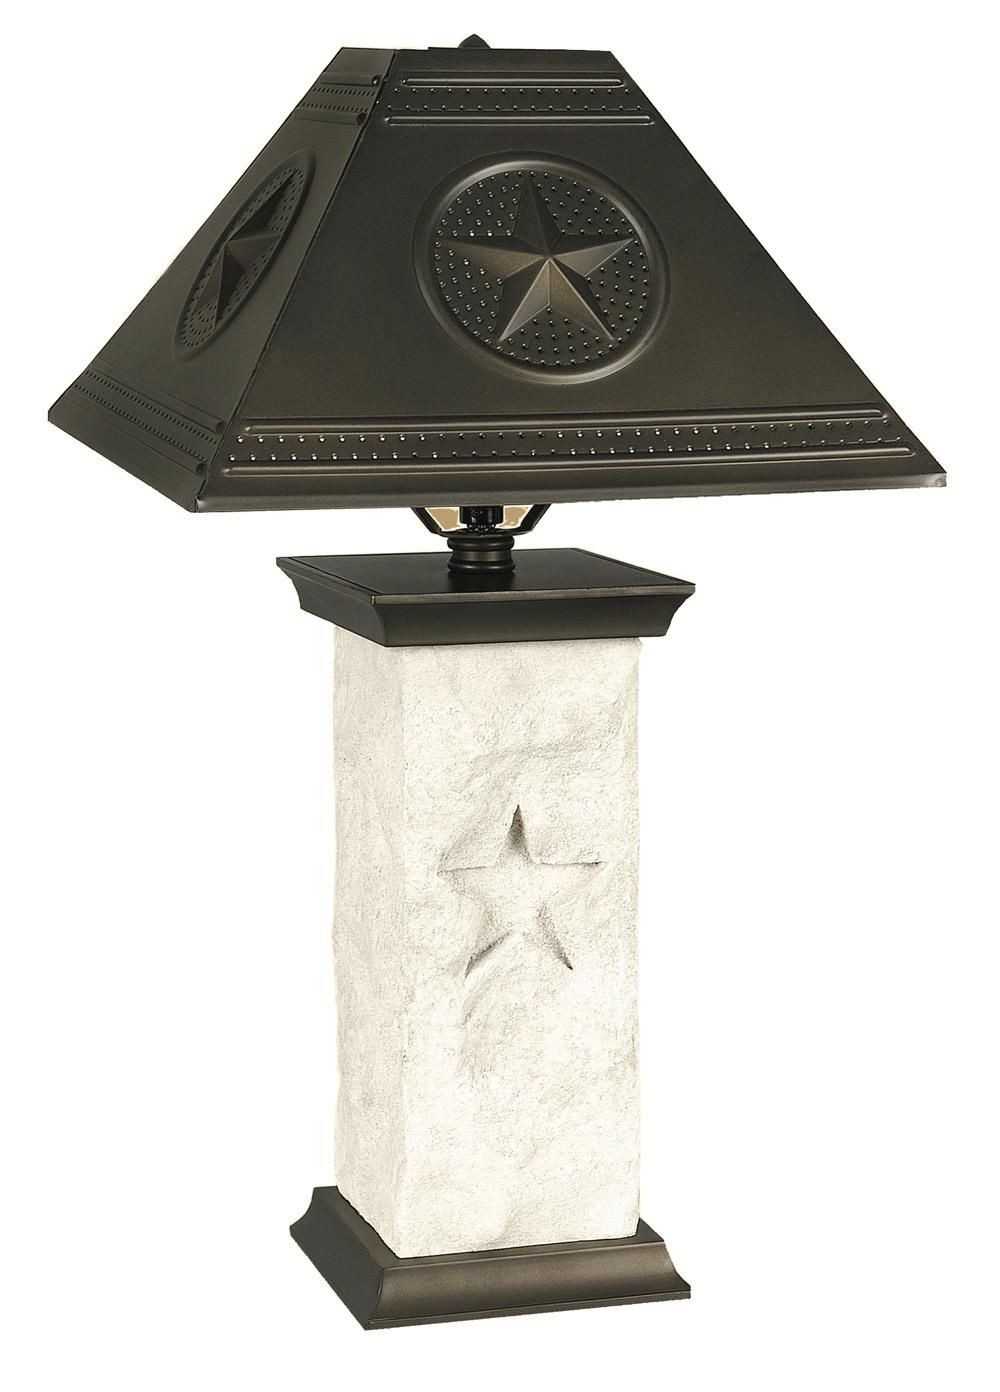 Rustic texas star lighting click on photo to zoom click